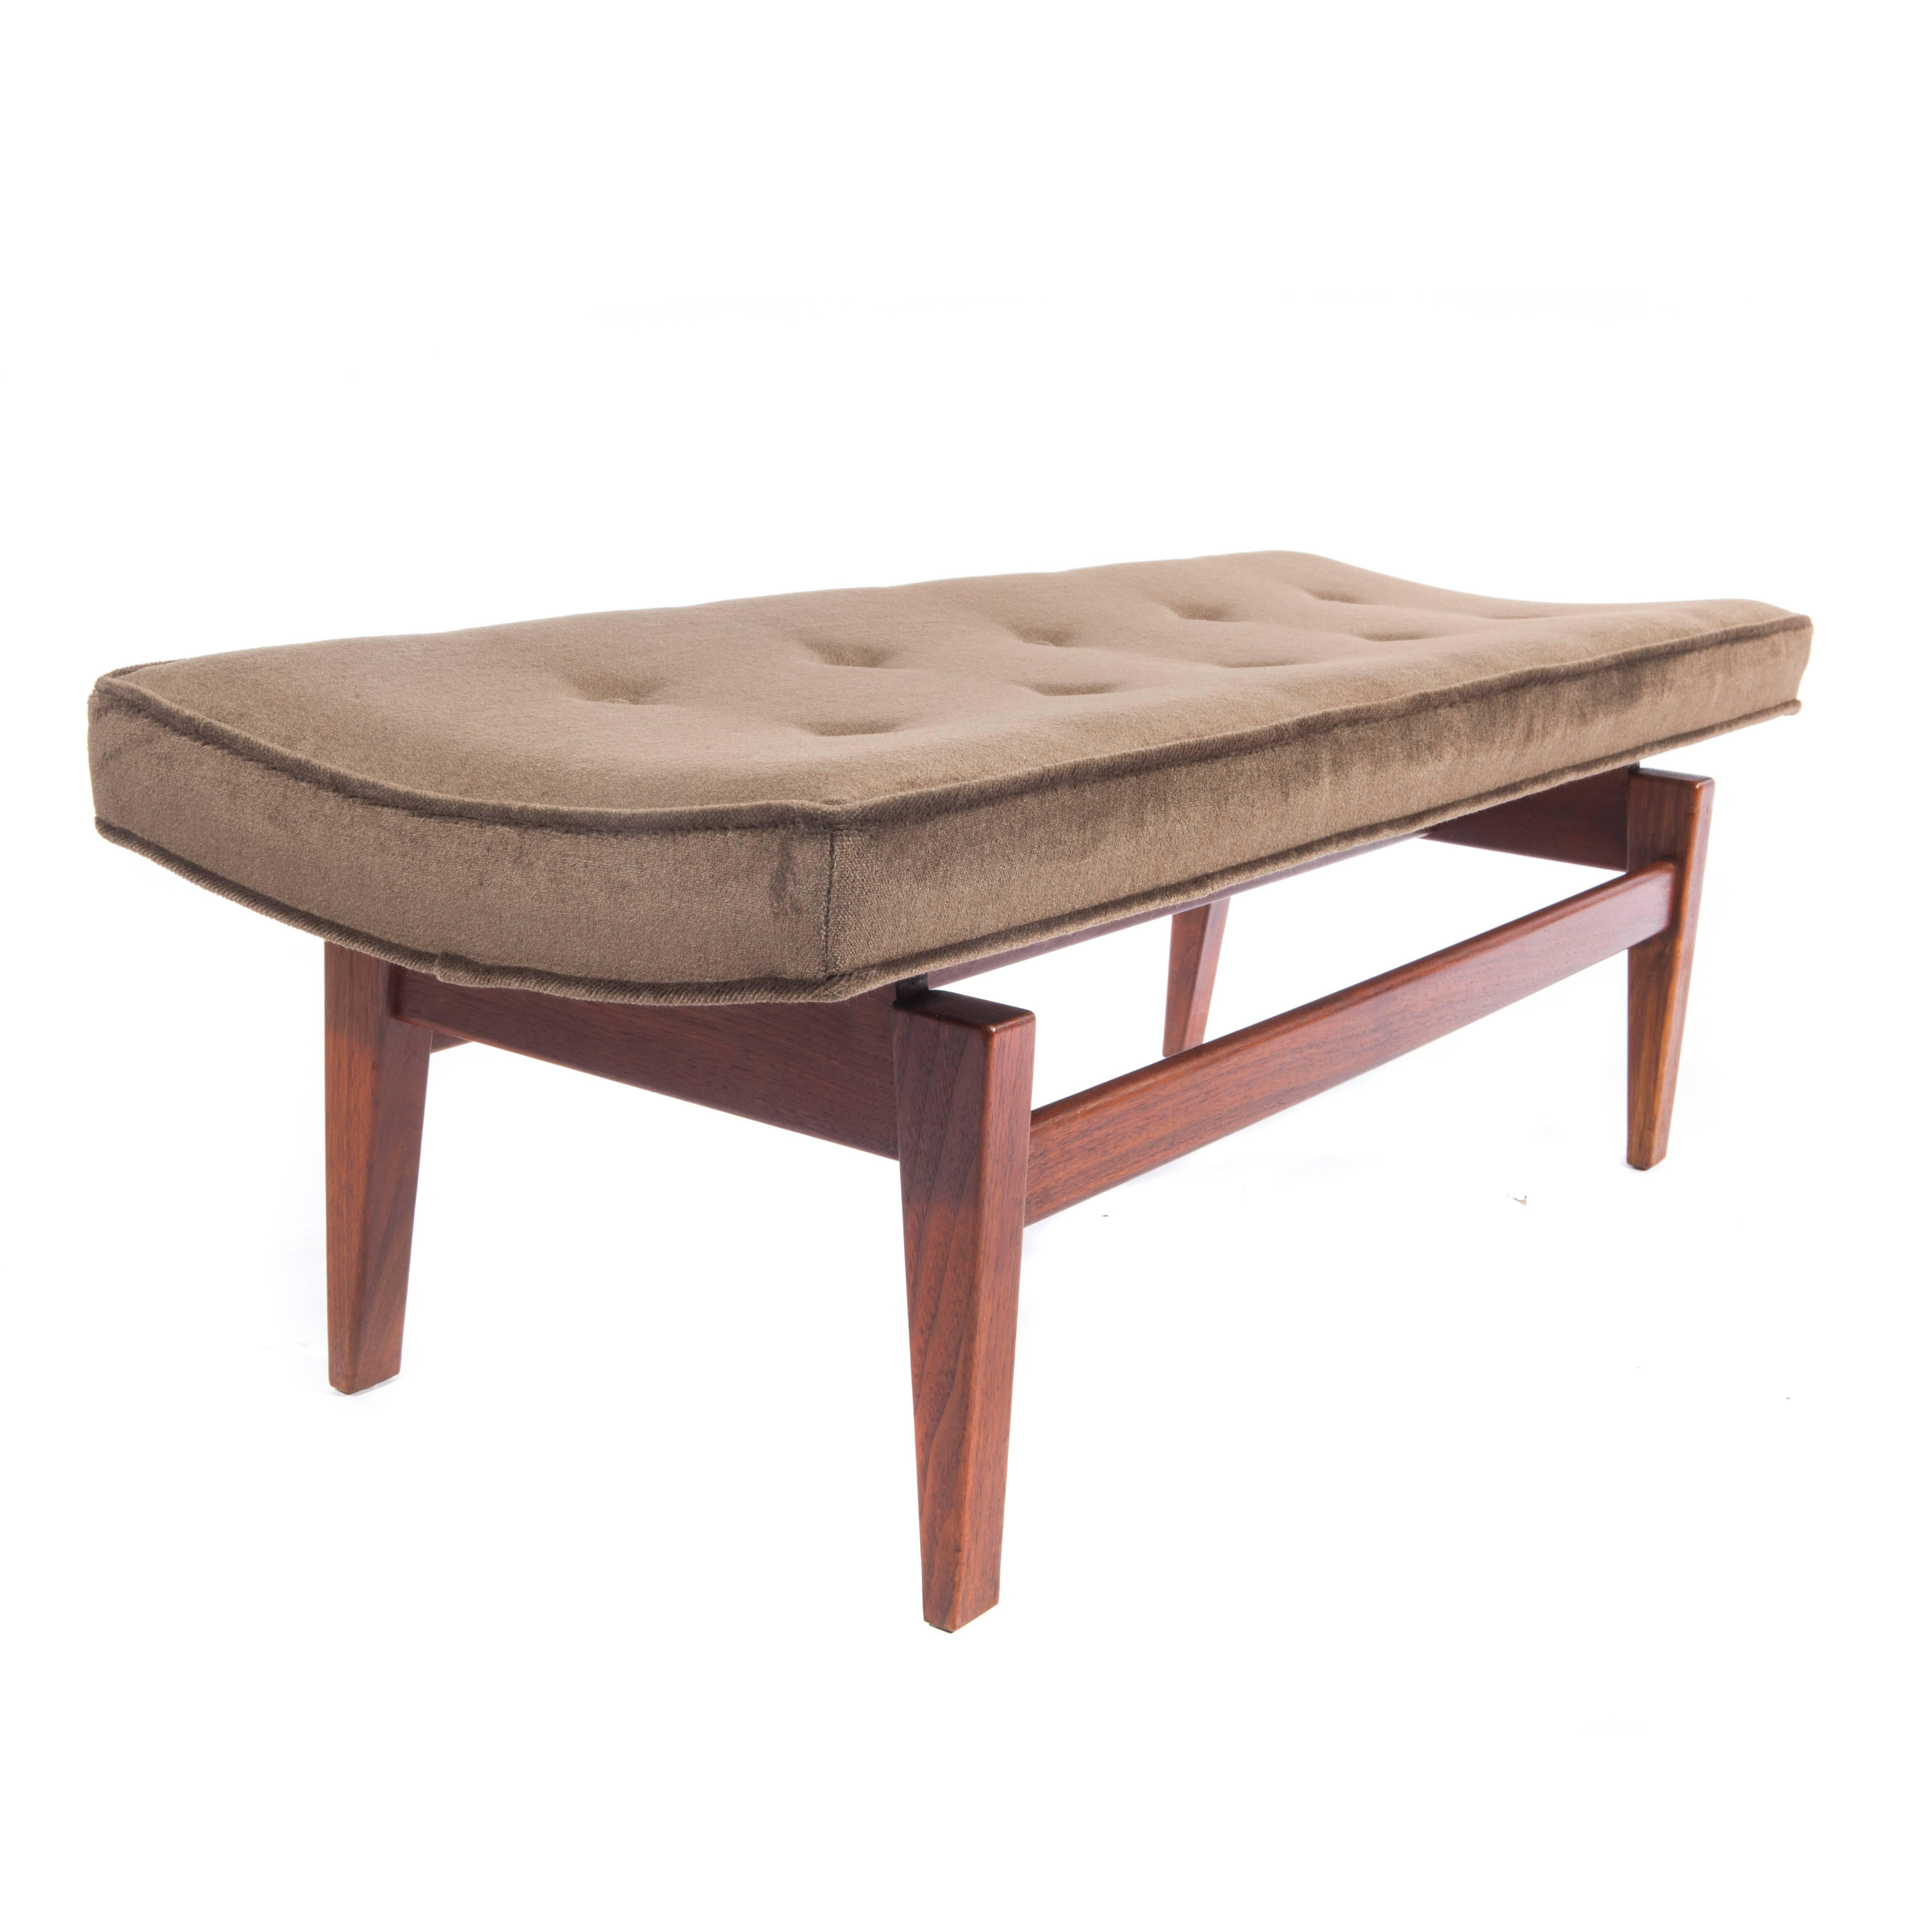 Mid-20th Century Jens Risom Pair of 1960s Cantilevered Walnut and Mohair Benches